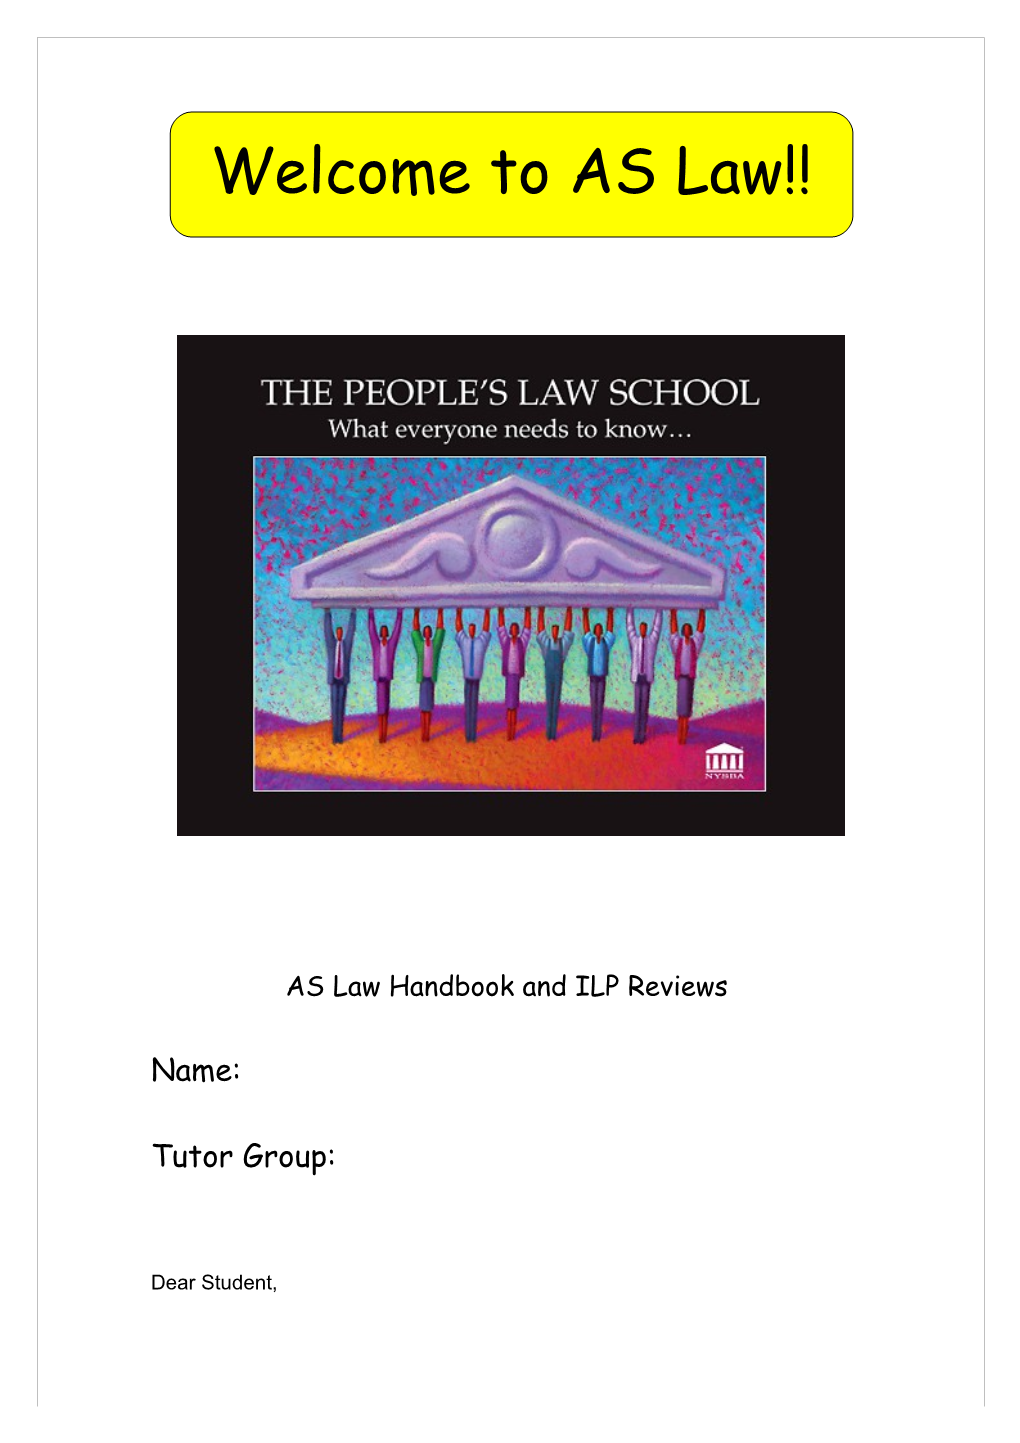 AS Law Handbook and ILP Reviews